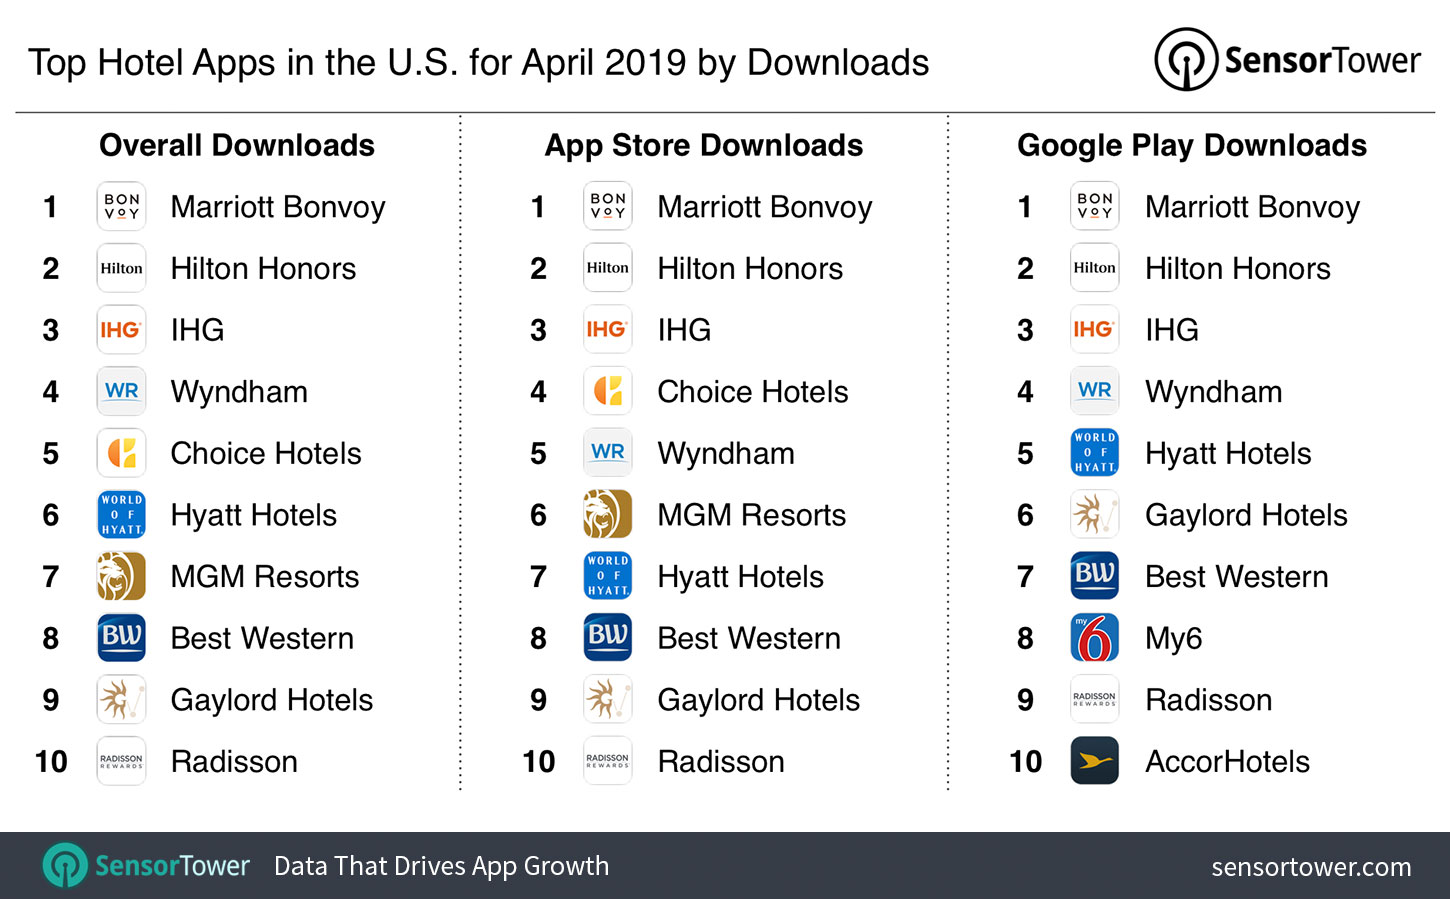 Top Hotel Apps in the U.S. for April 2019 by Downloads